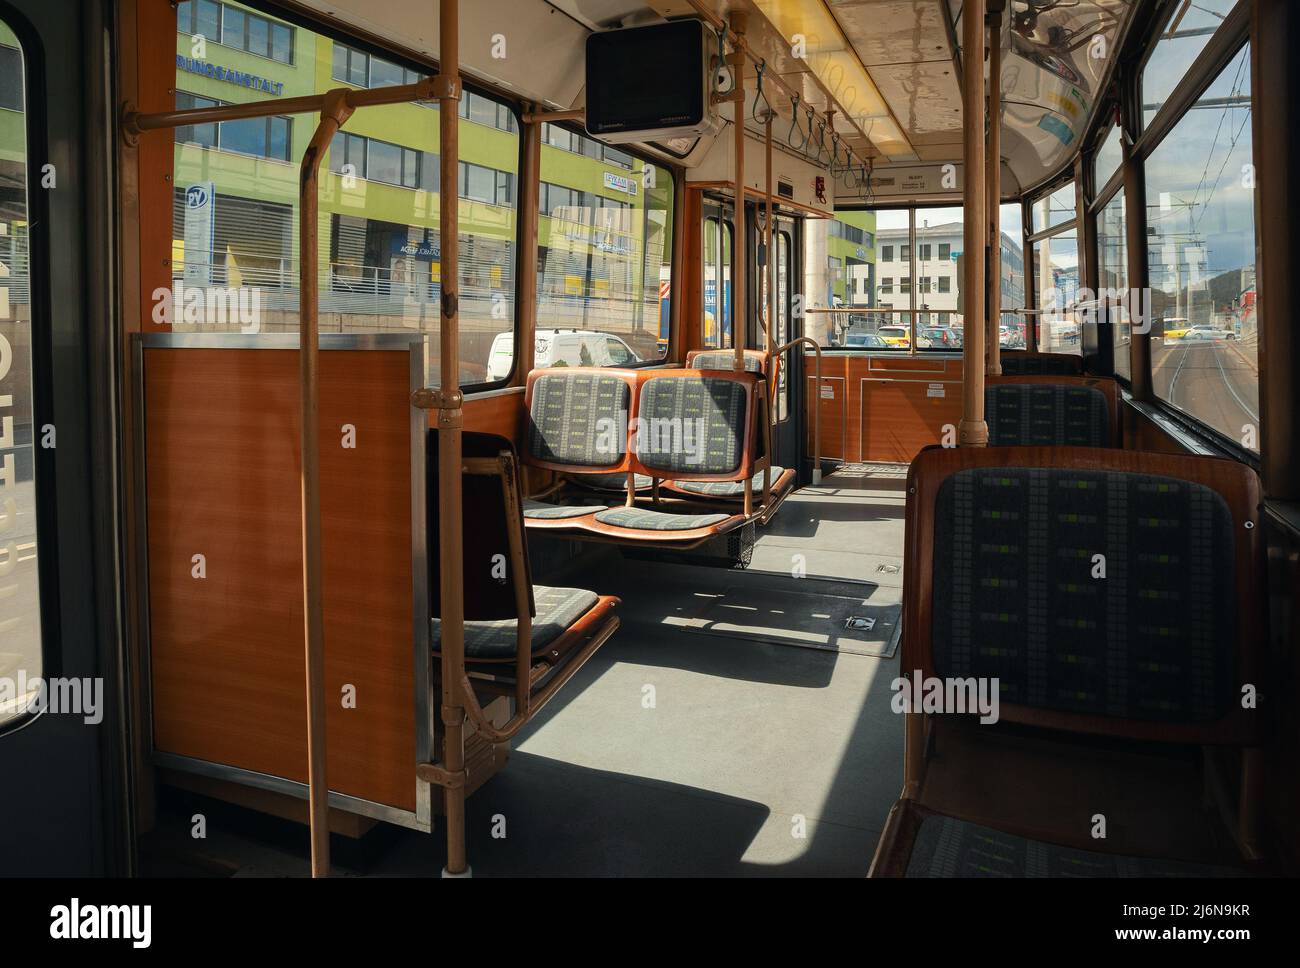 Graz, Austria - April 25, 2022: In the Tram from Graz while driving around the city. Stock Photo